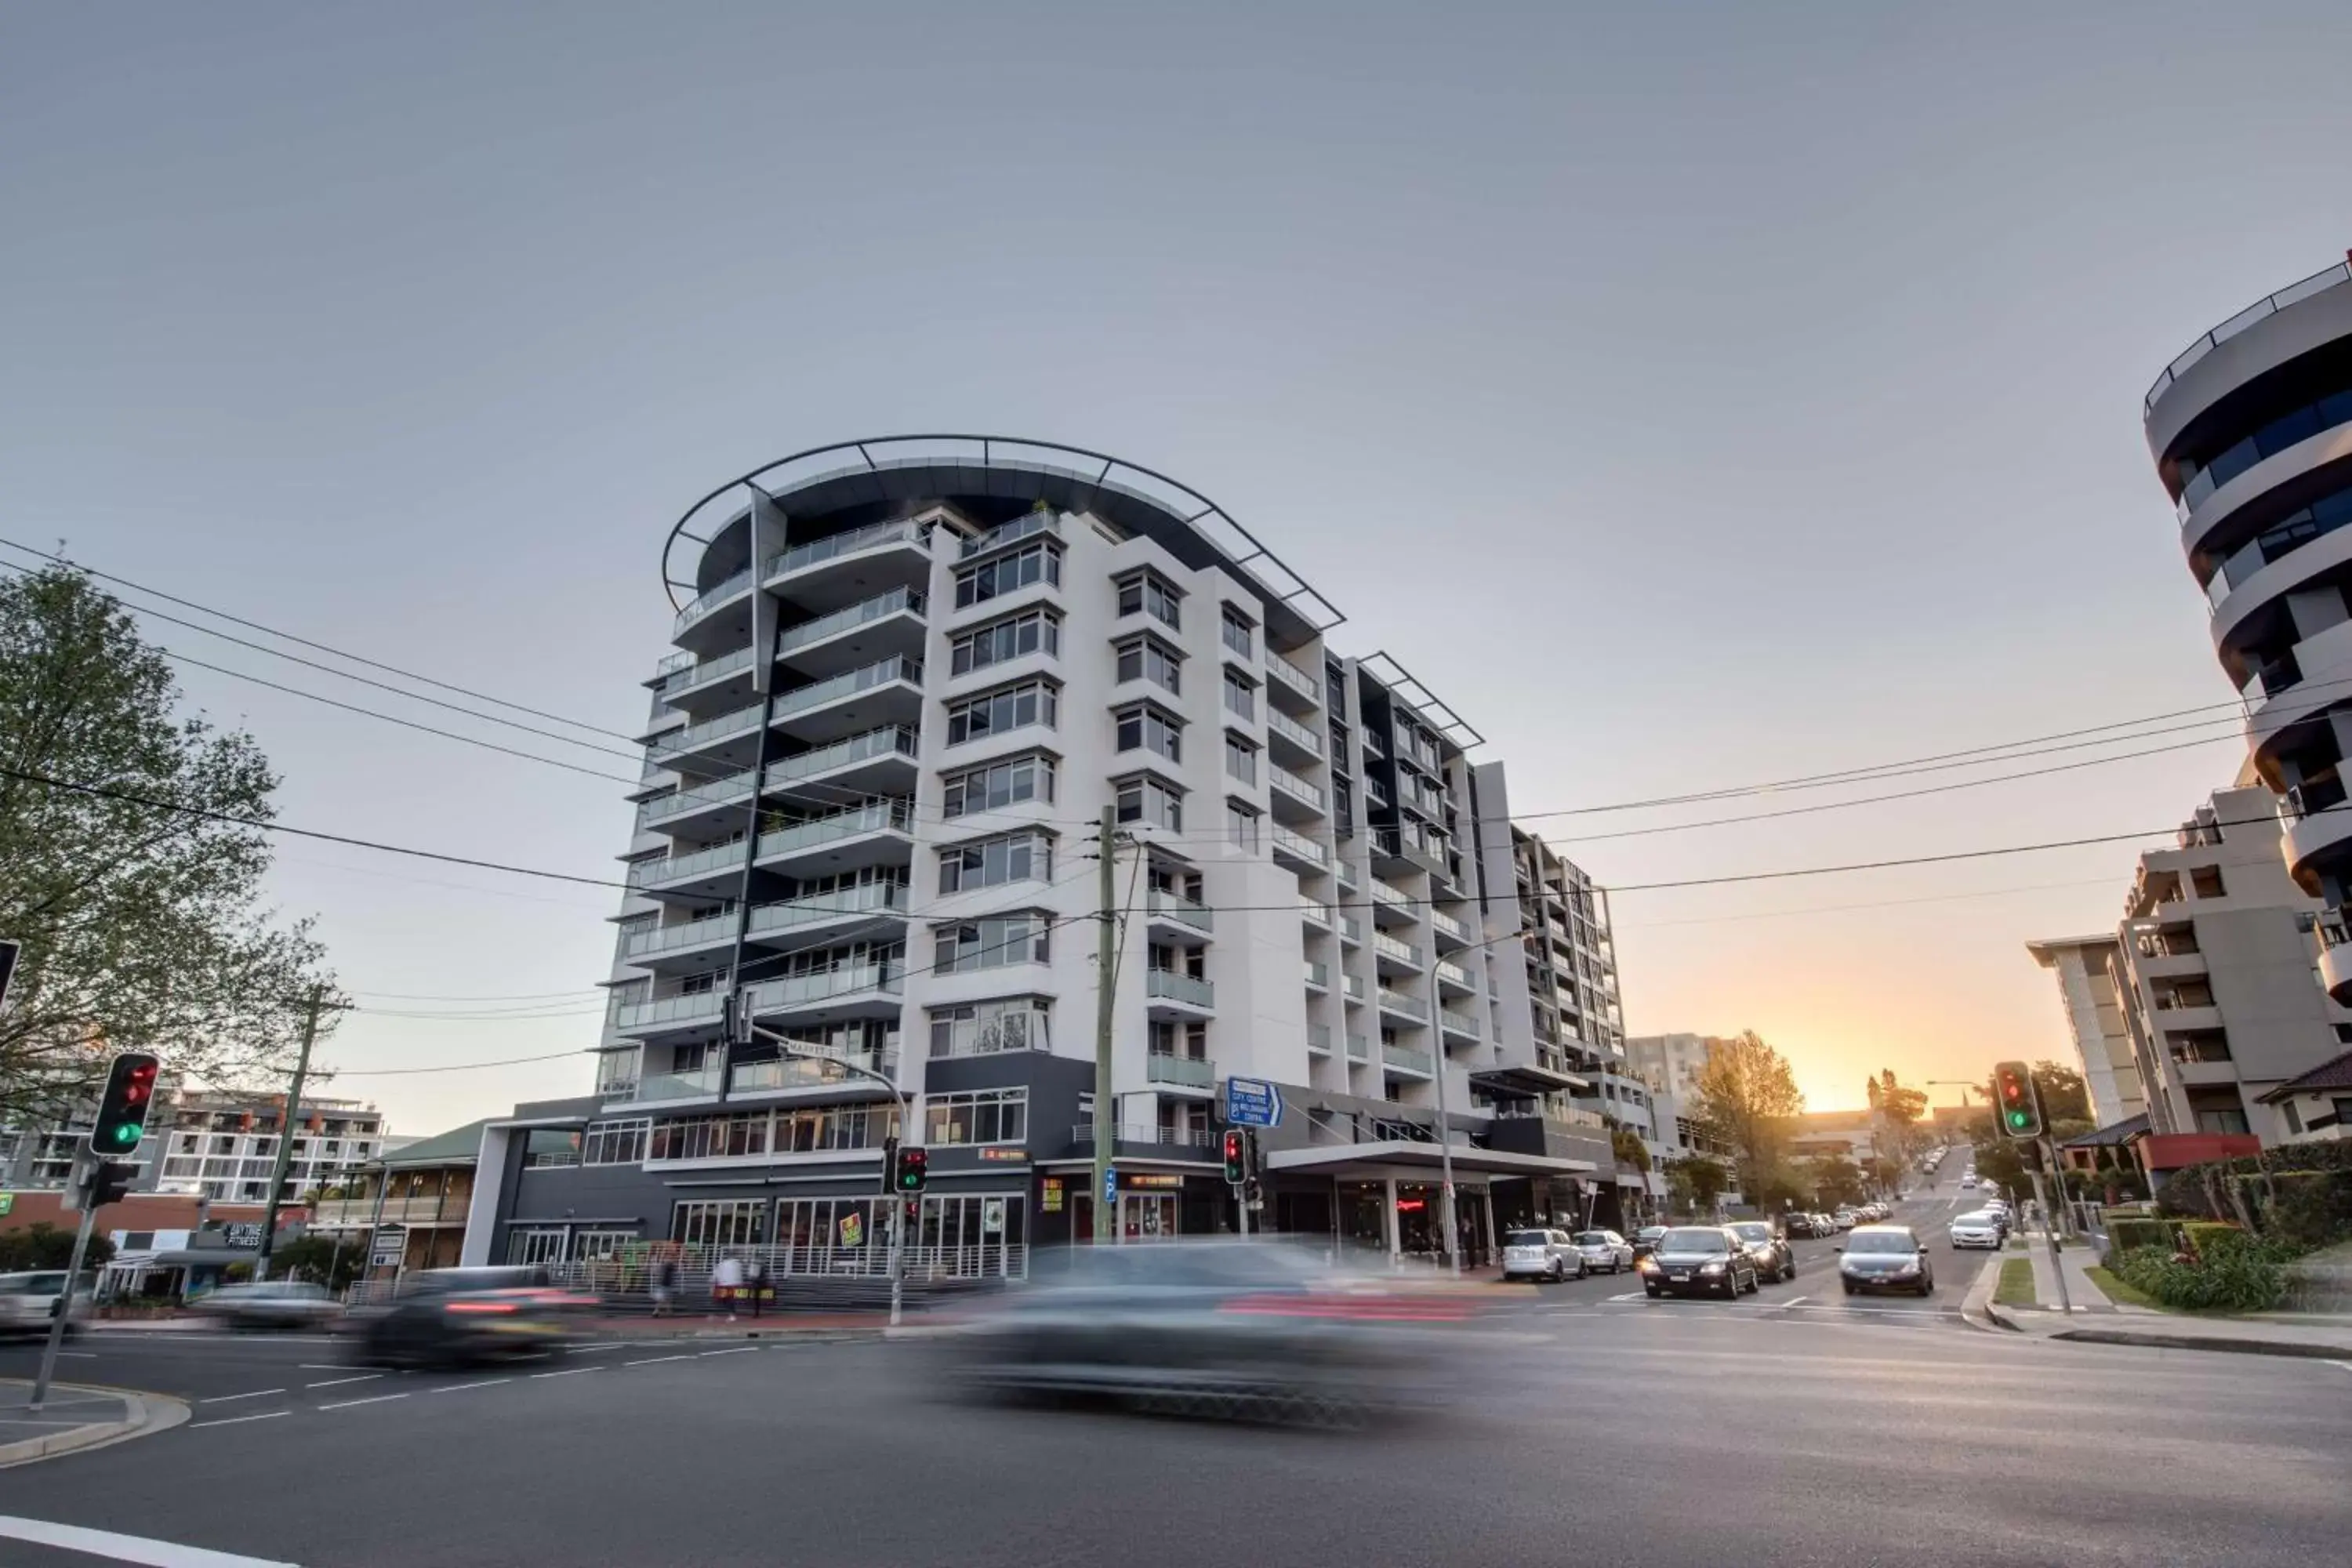 Property building in Adina Apartment Hotel Wollongong